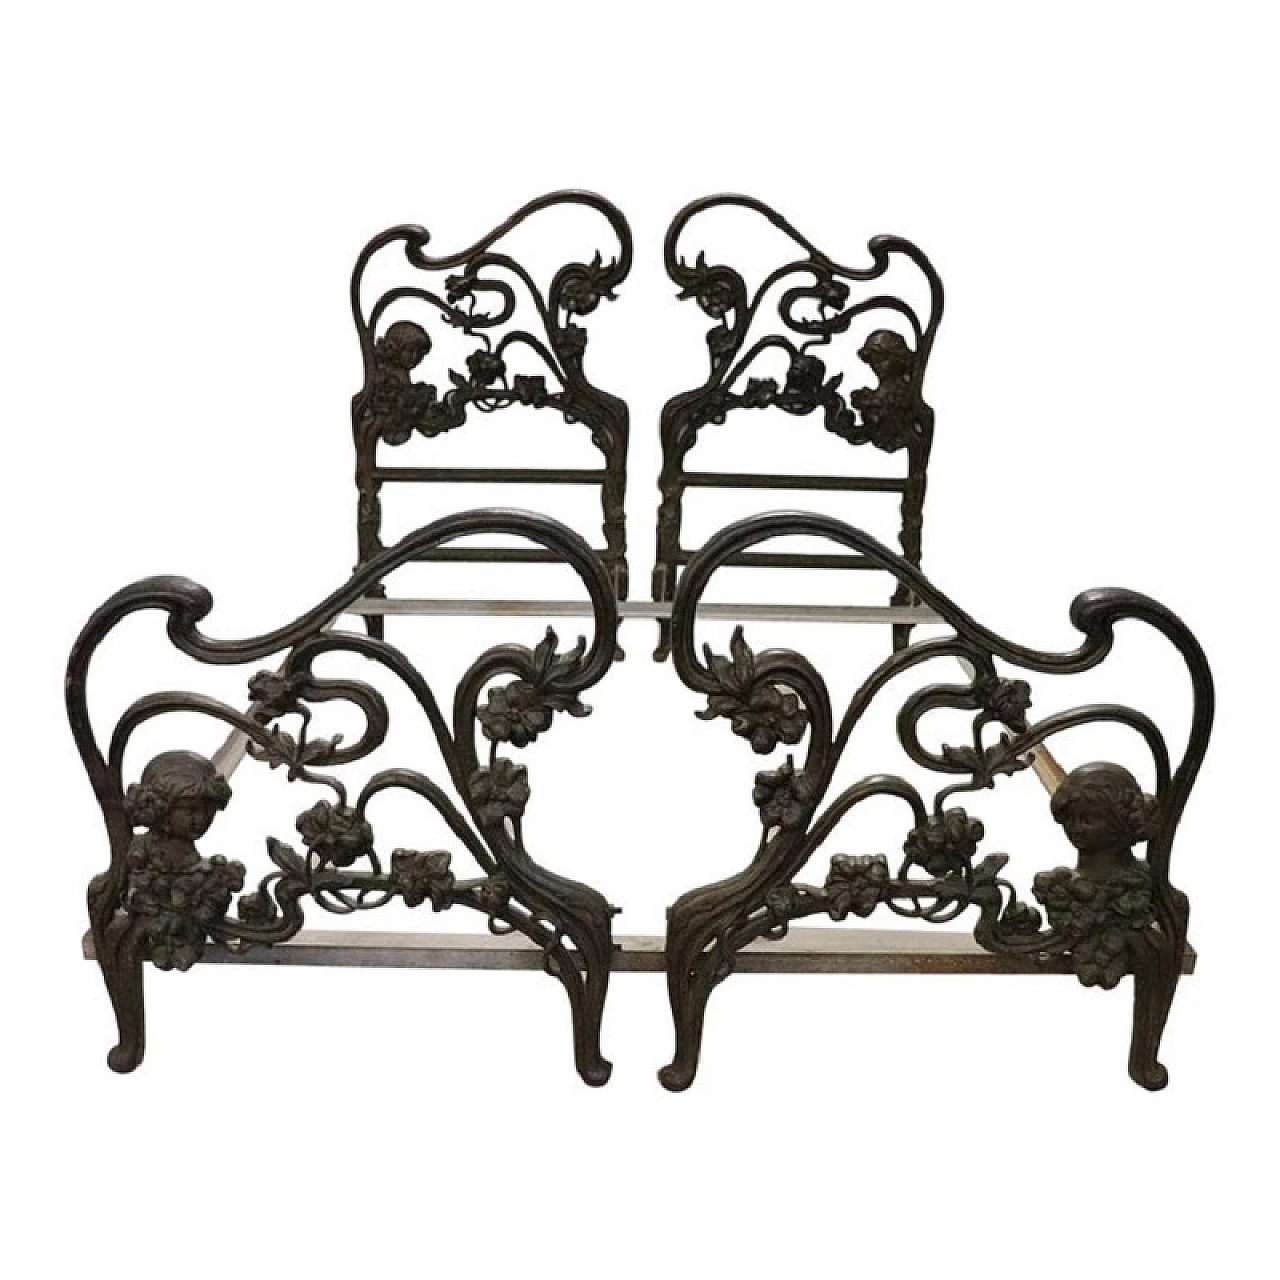 Hand-forged cast iron Art Nouveau double bed, late 19th century 1